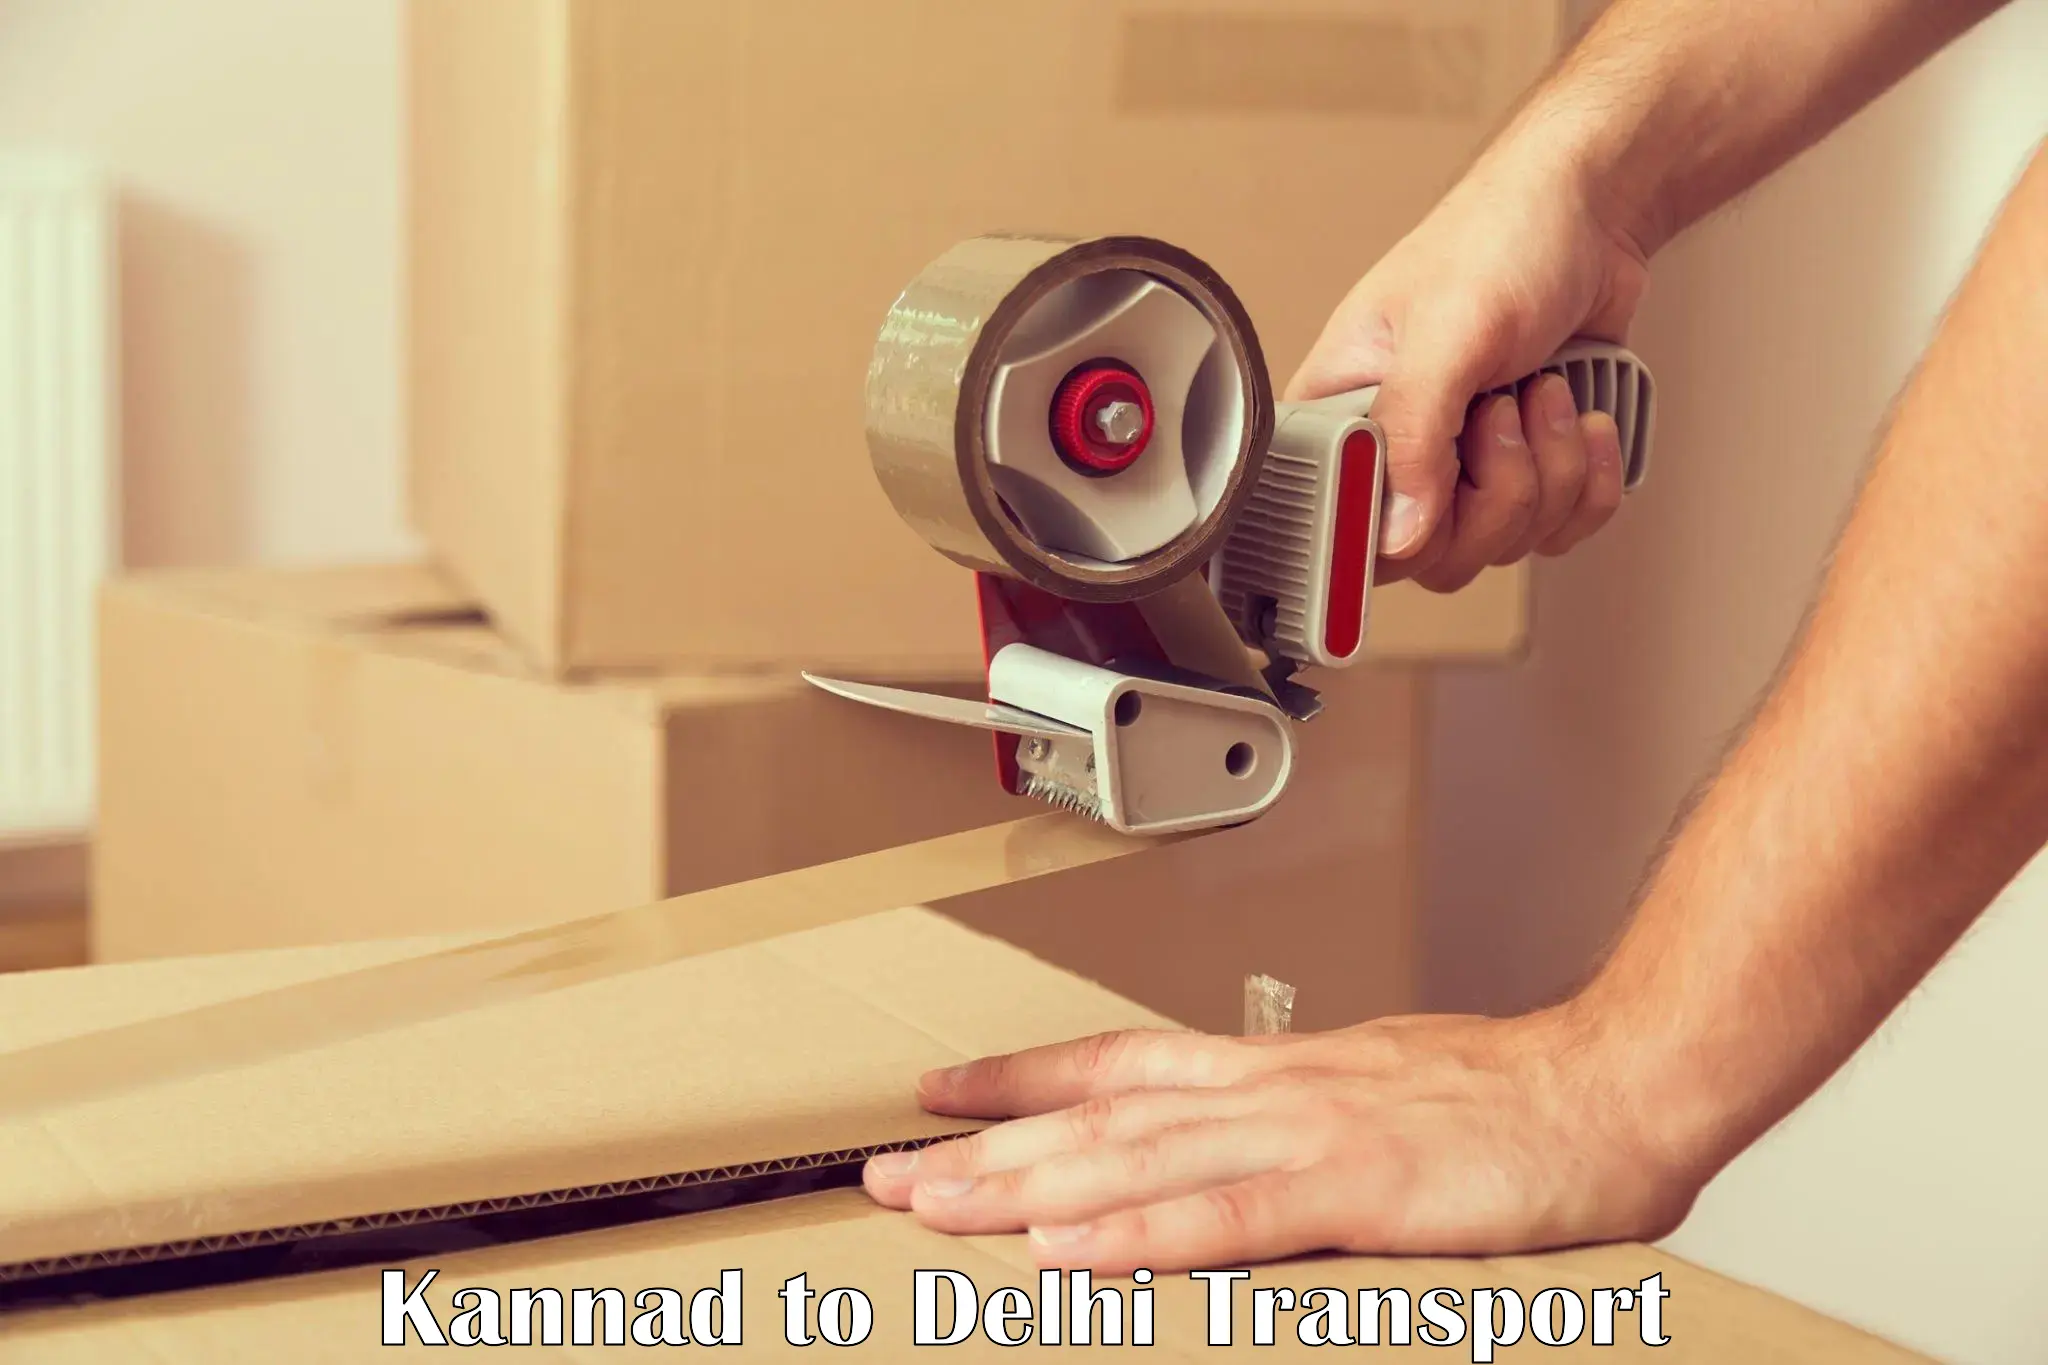 Container transportation services Kannad to Delhi